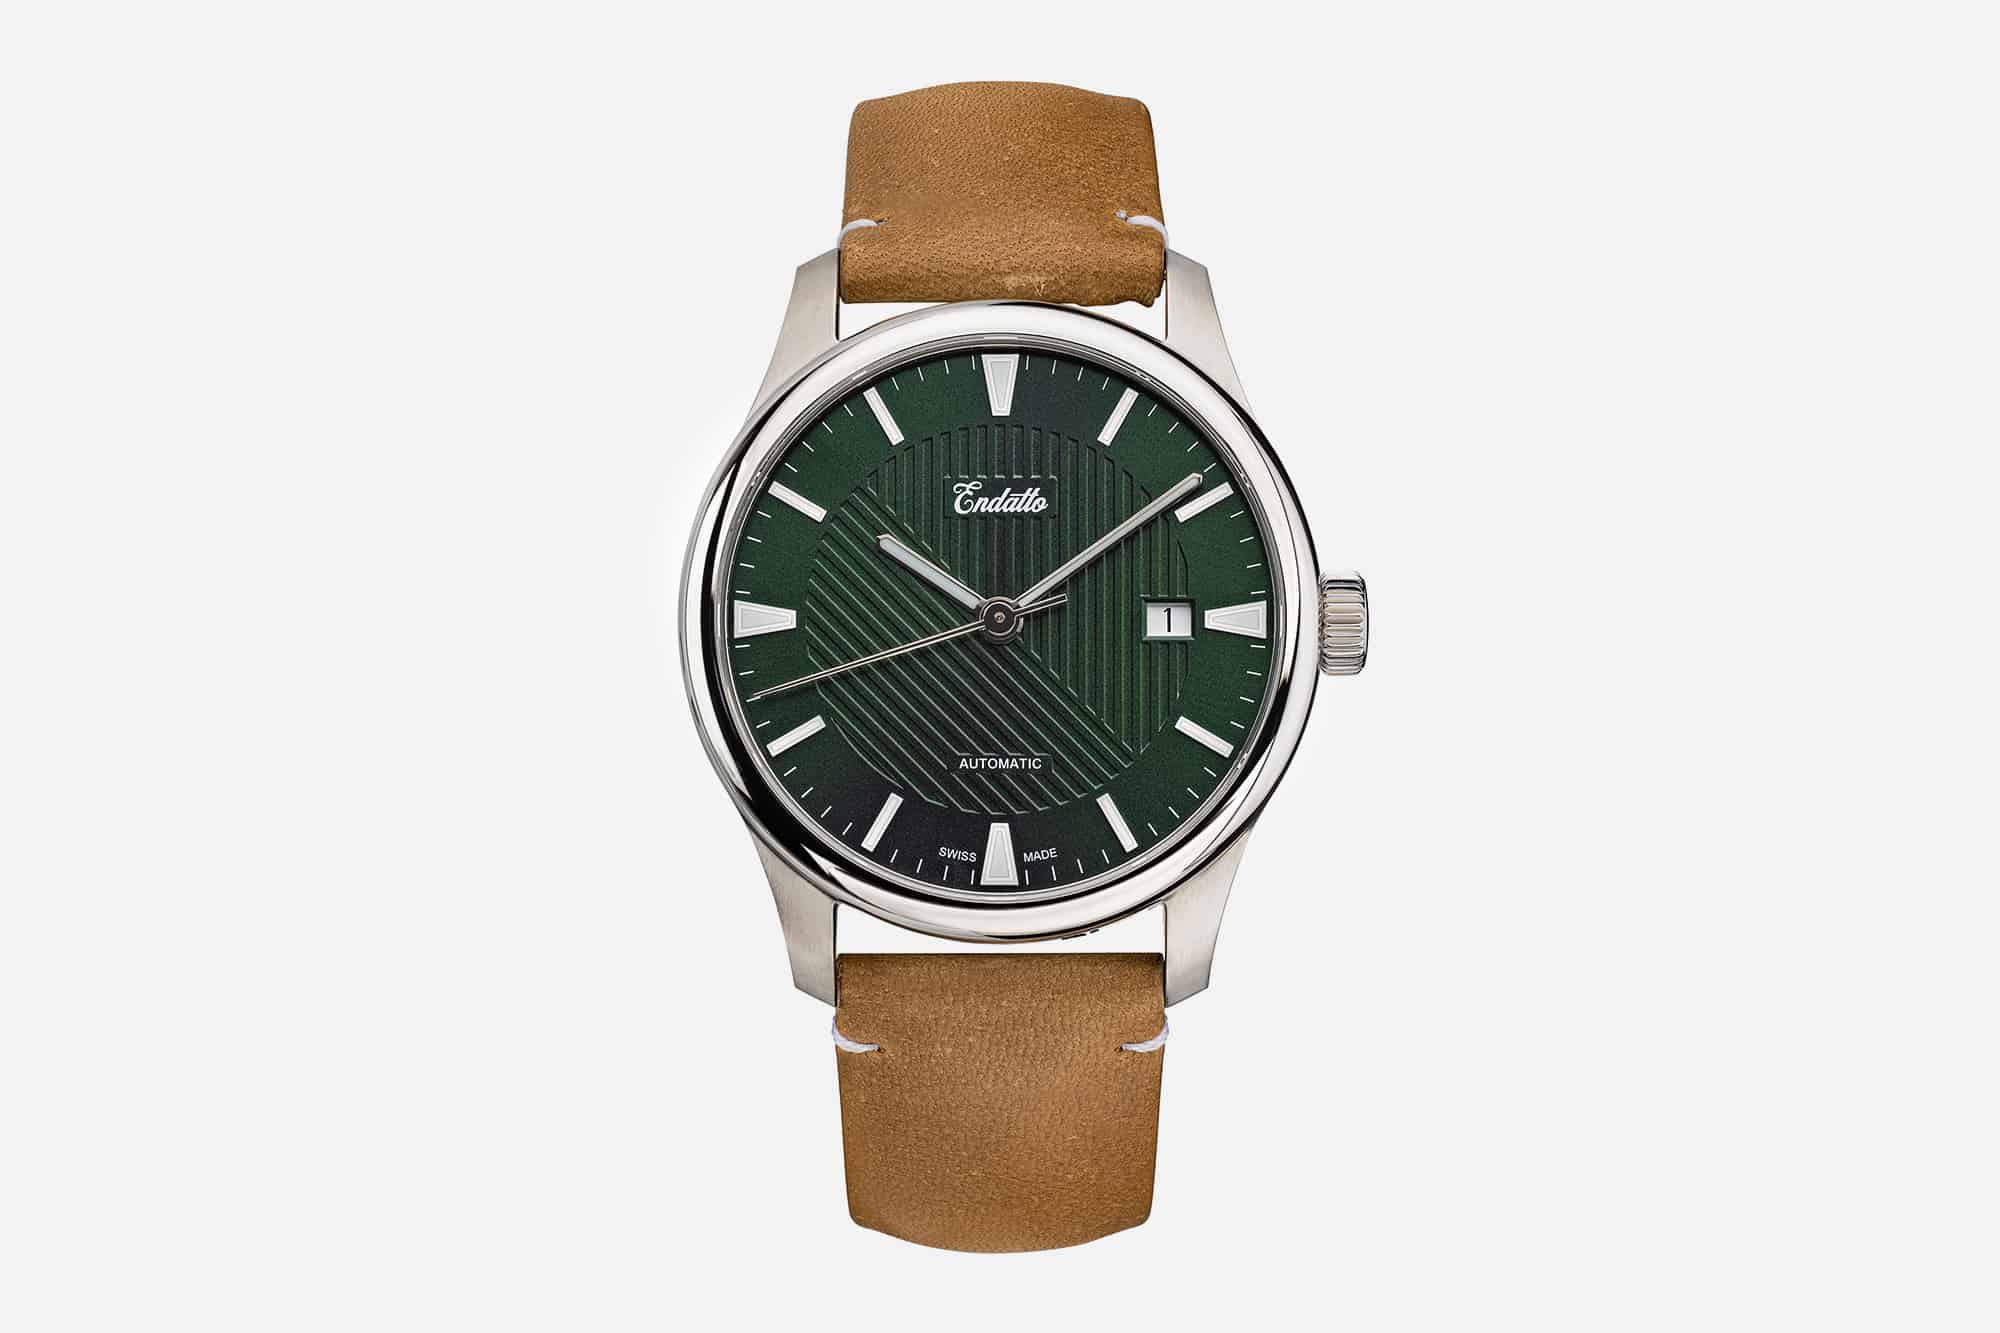 Endatto, a New Brand, Debuts Two Watches Inspired by the American ...